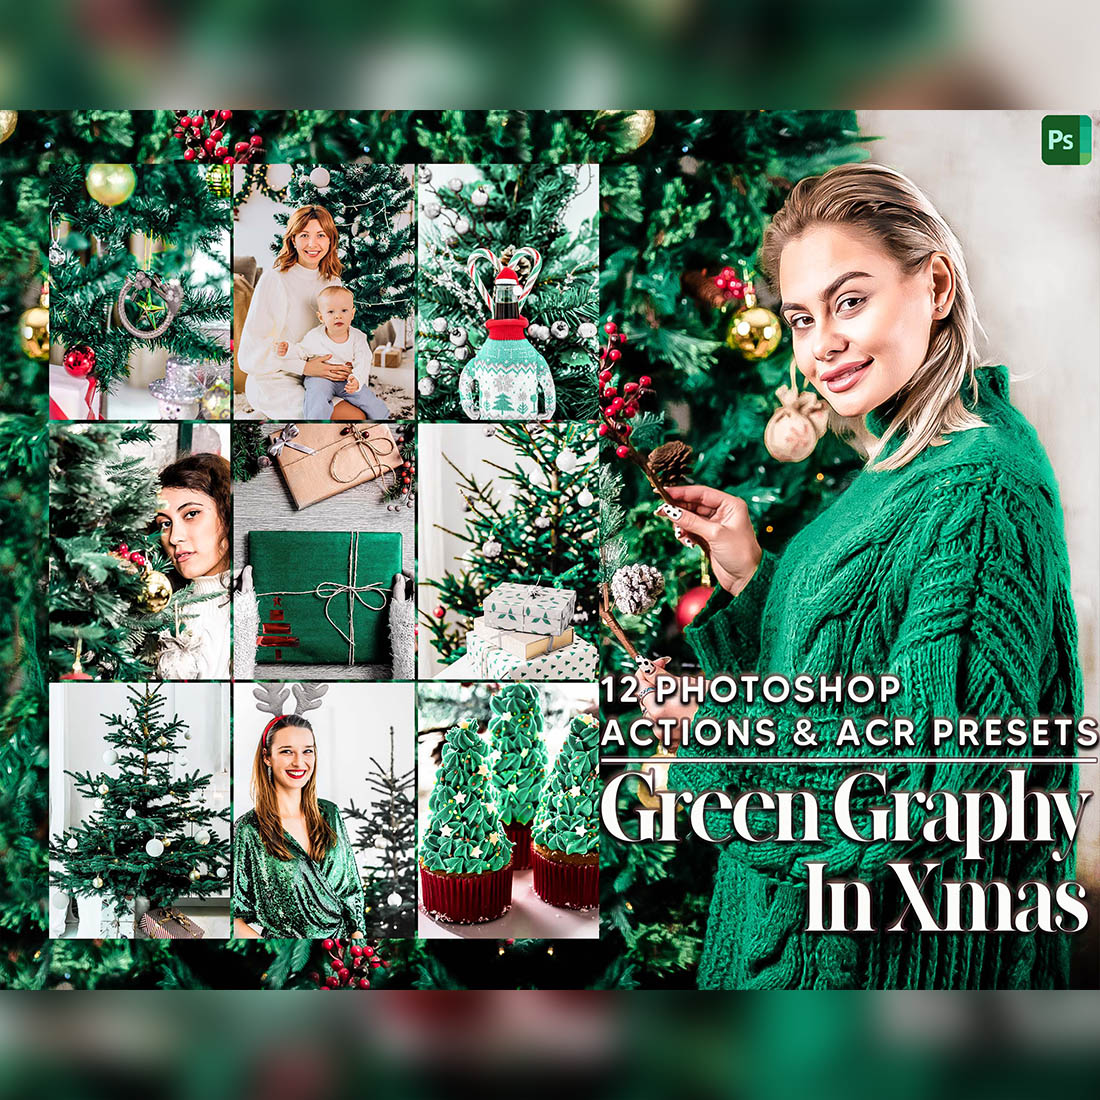 12 Photoshop Actions, Green Graphy In Xmas Ps Action, Bright ACR Preset, Vibrant Ps Filter, Atn Portrait And Lifestyle Theme For Instagram, Blogger cover image.